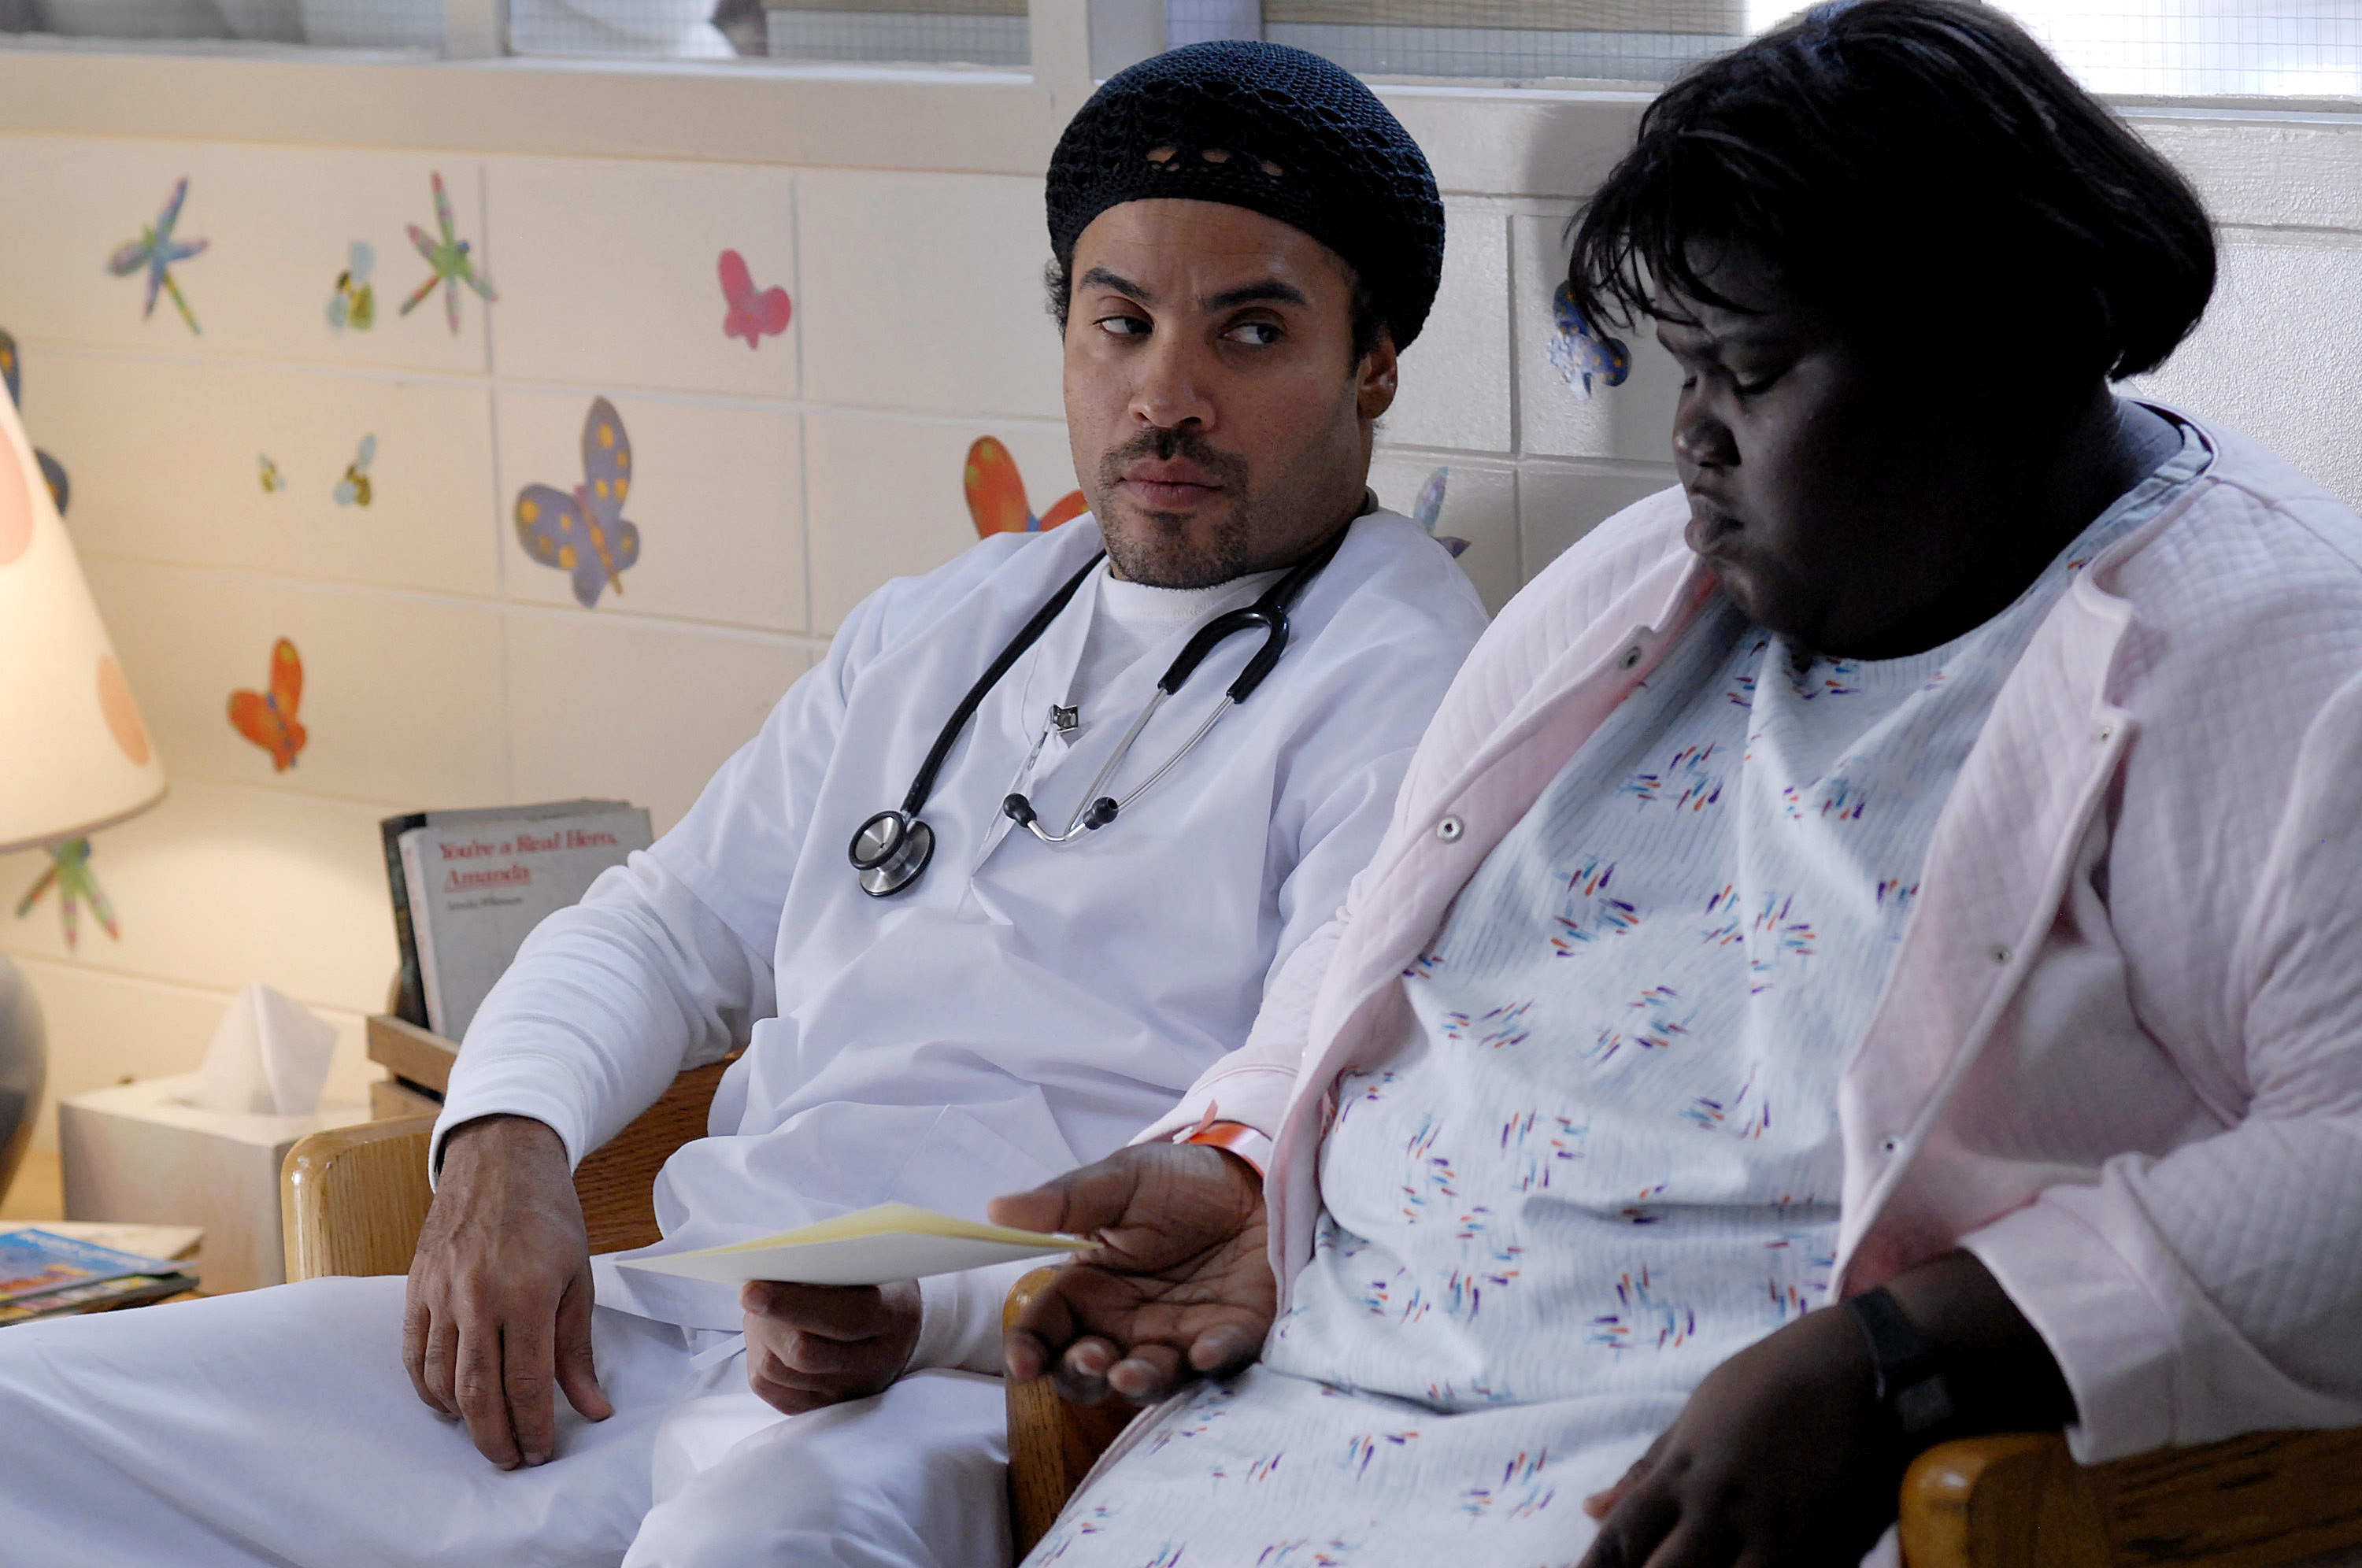 Lenny Kravitz in character as a doctor handing a paper to Gabourey &#x27;Gabby&#x27; Sidibe, who is also in character